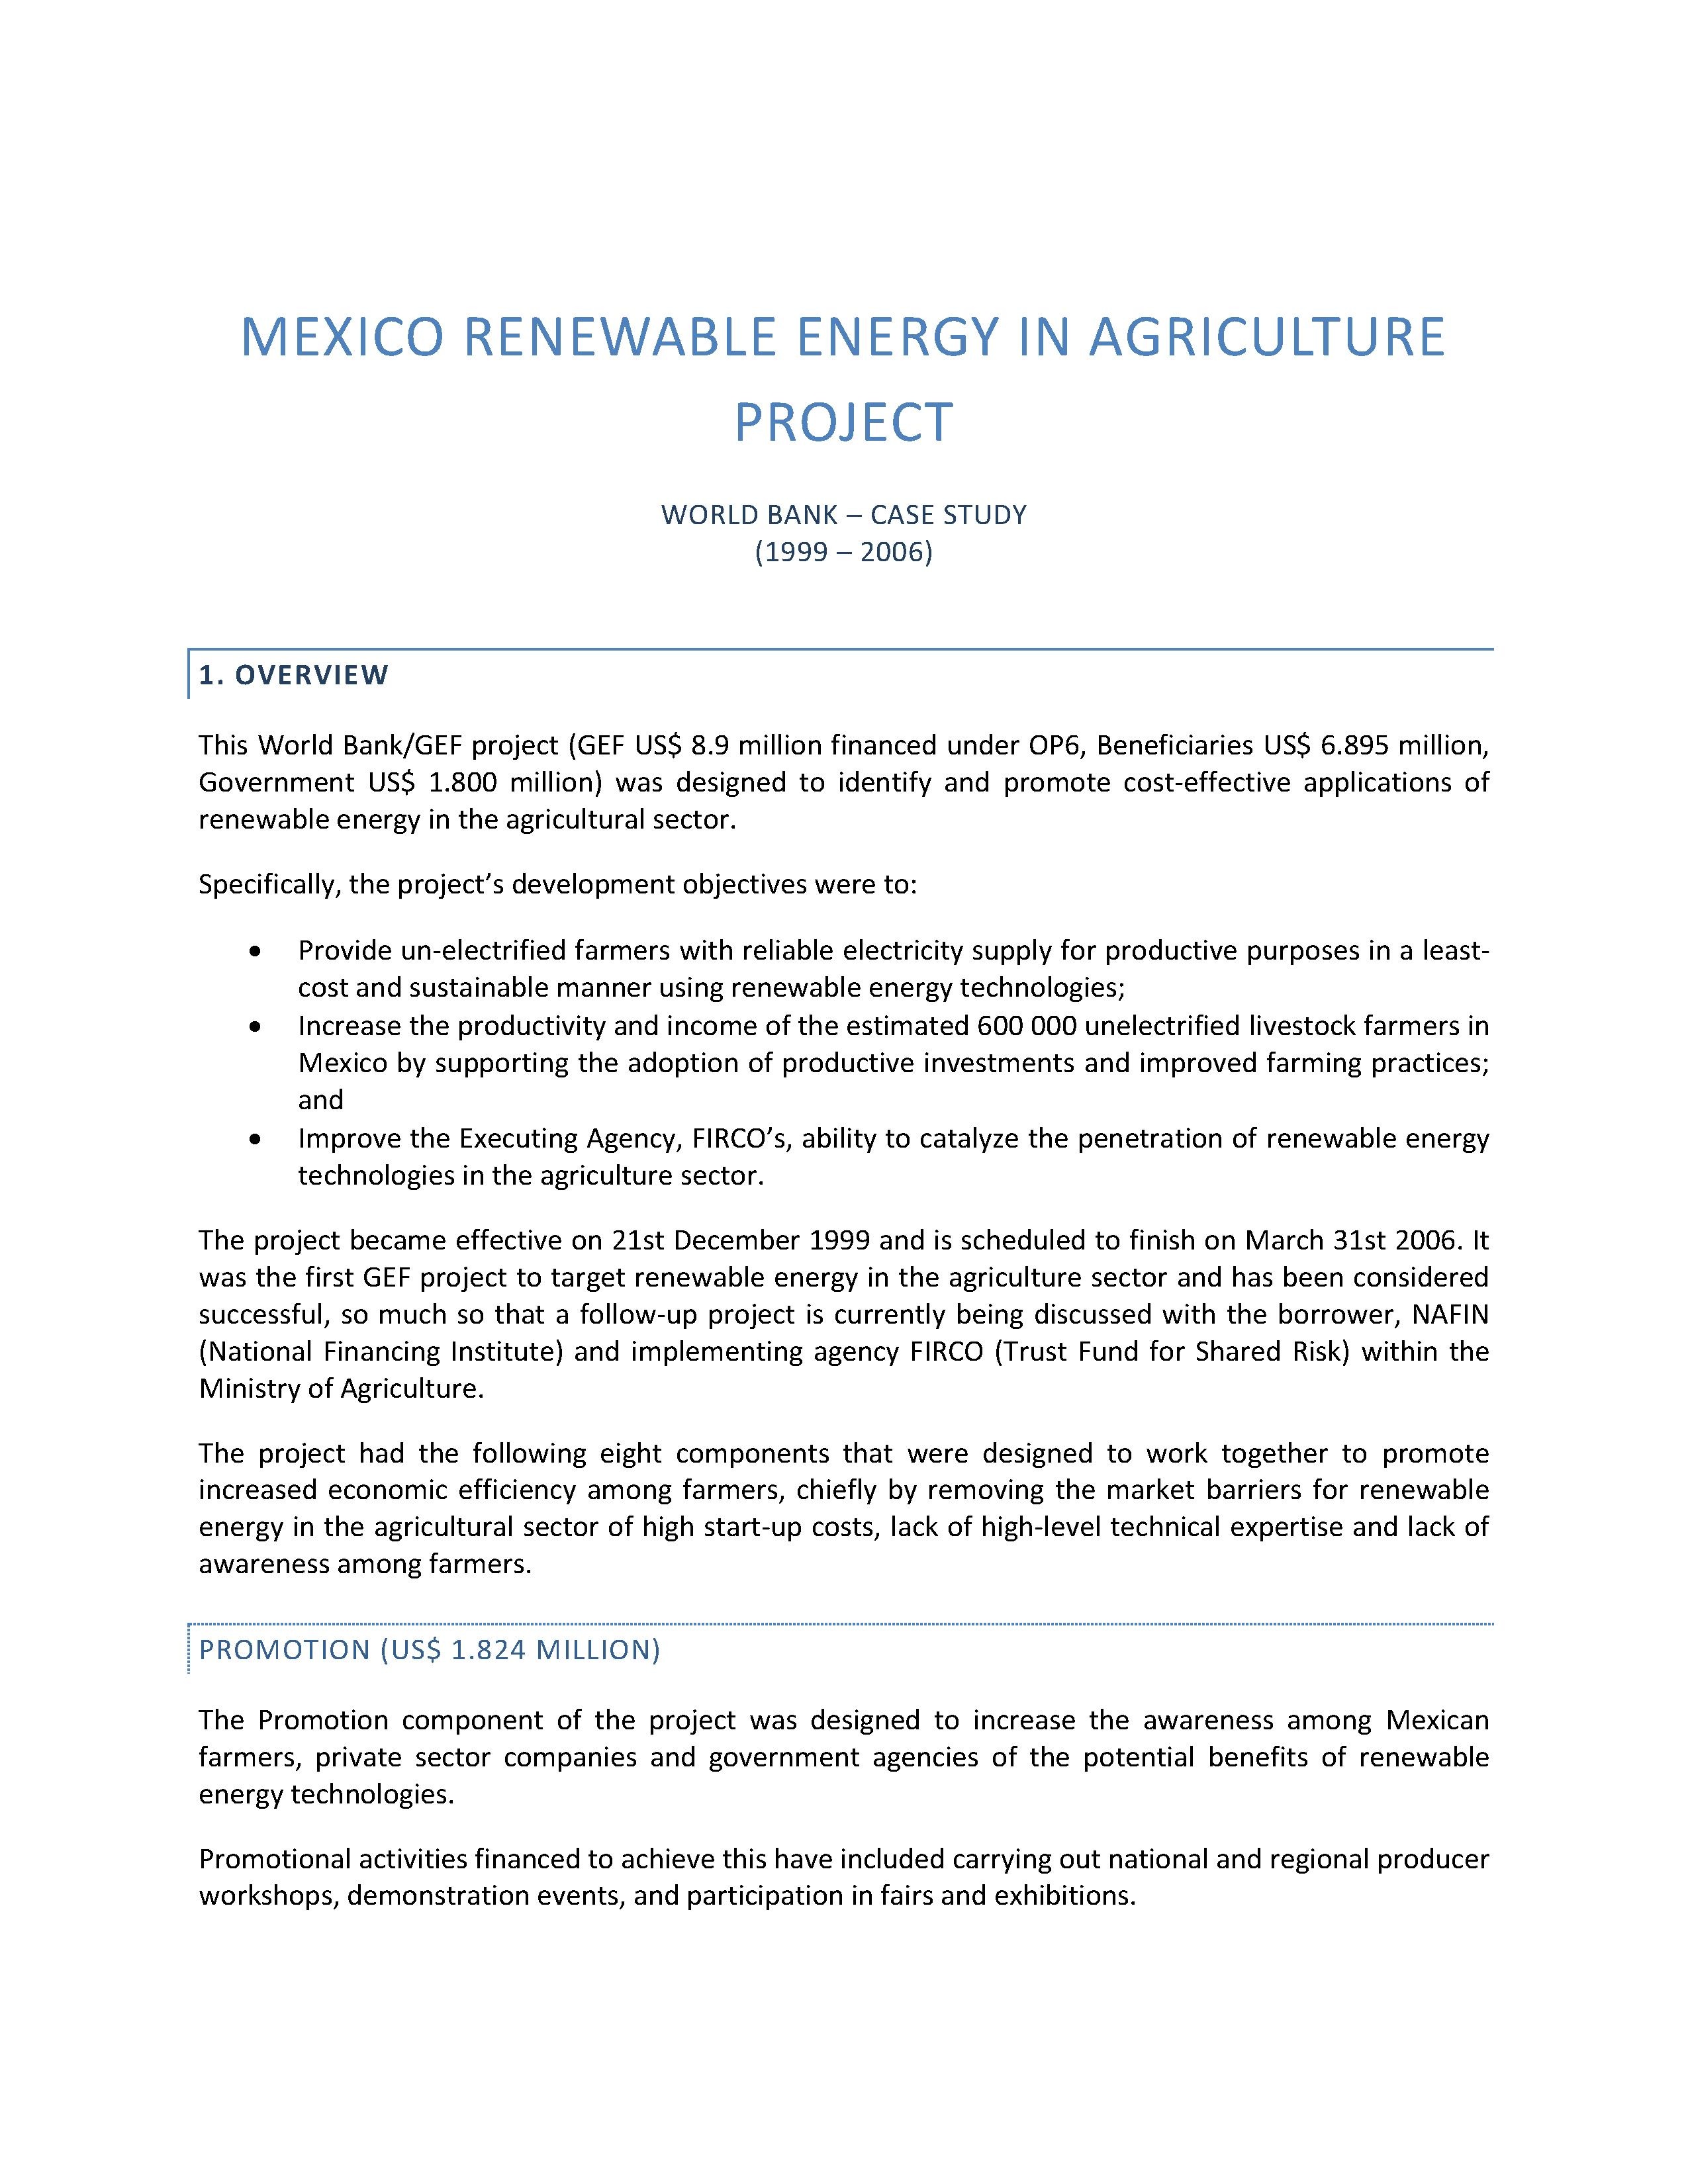 File:Mexico Renewable Energy in Agriculture Project.pdf